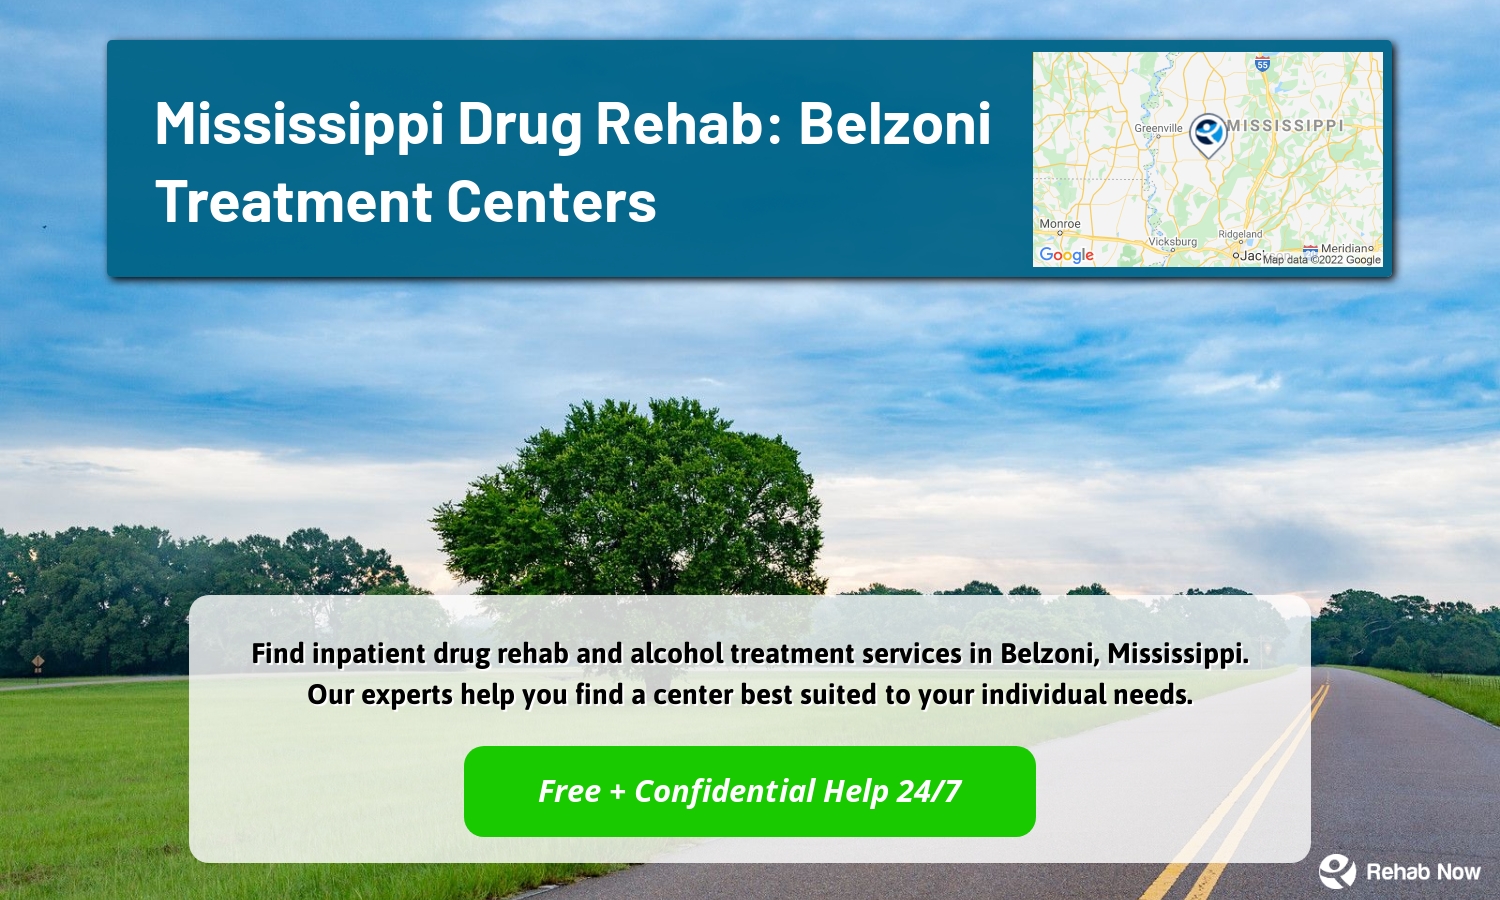 Find inpatient drug rehab and alcohol treatment services in Belzoni, Mississippi. Our experts help you find a center best suited to your individual needs.